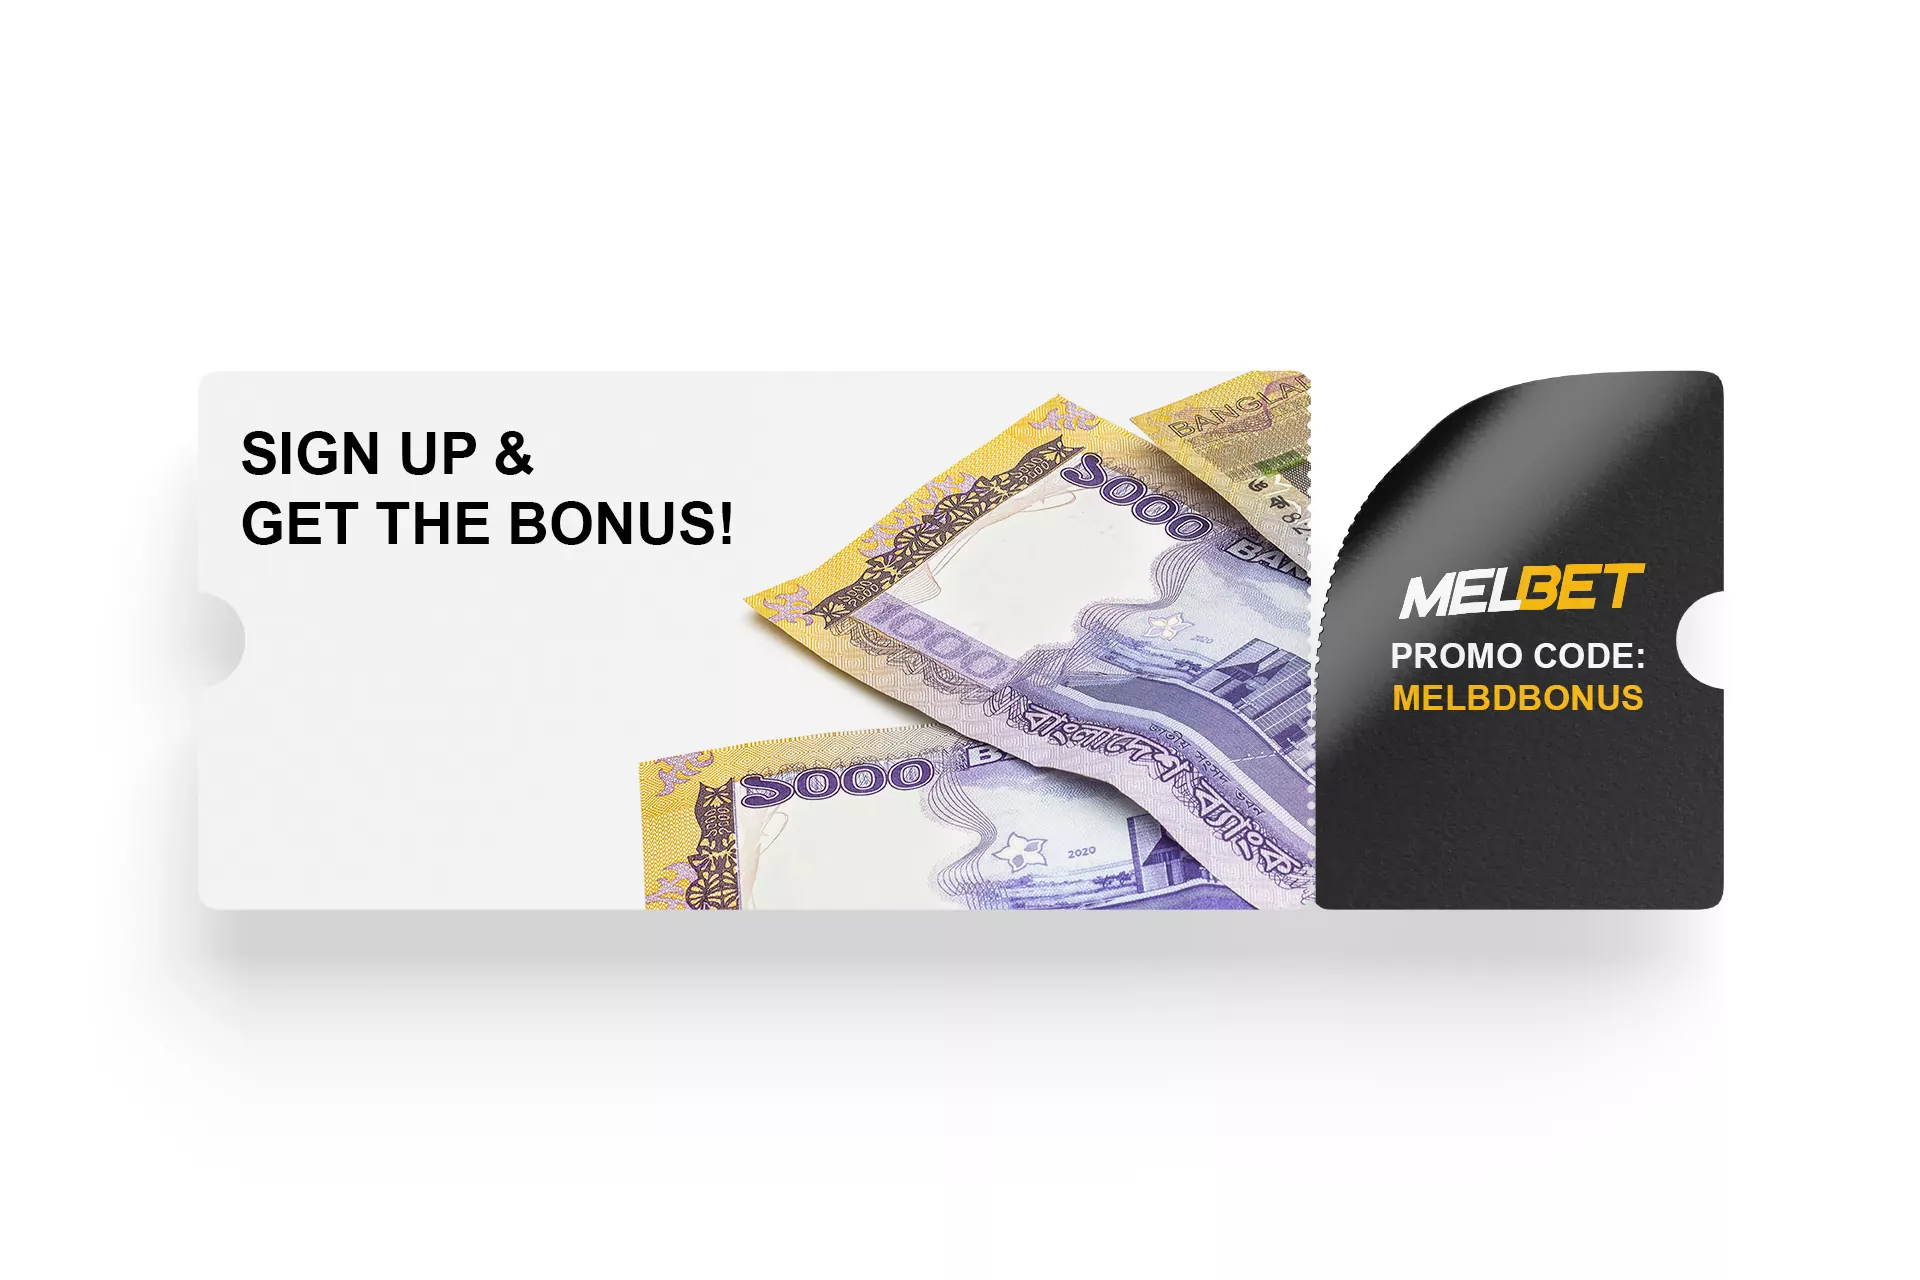 Use MELBDBONUS promo code in the Melbet app and take part in promotions.